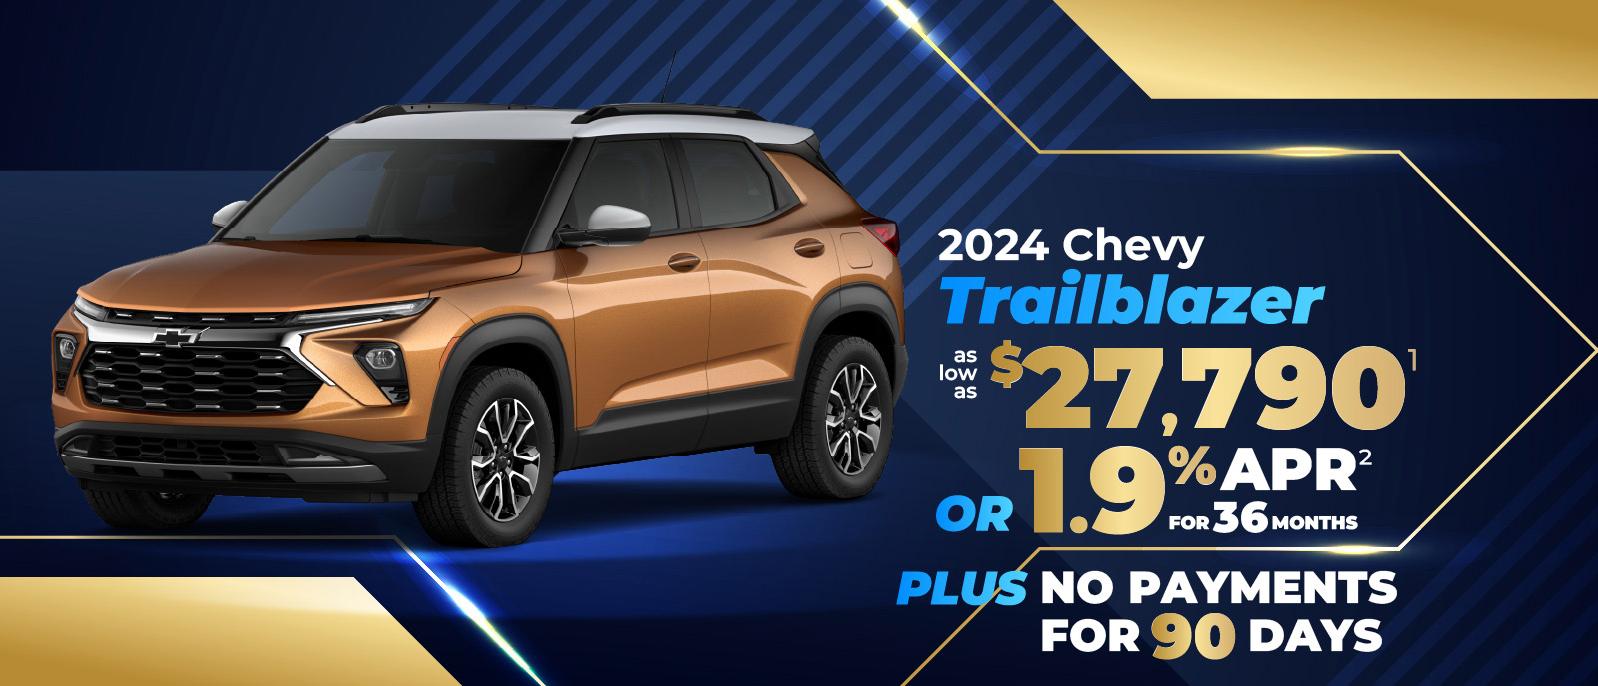 2023 Chevy Trailblazer - as low as $27,790 or 1.9% APR for 36 months plus no payments for 90 days